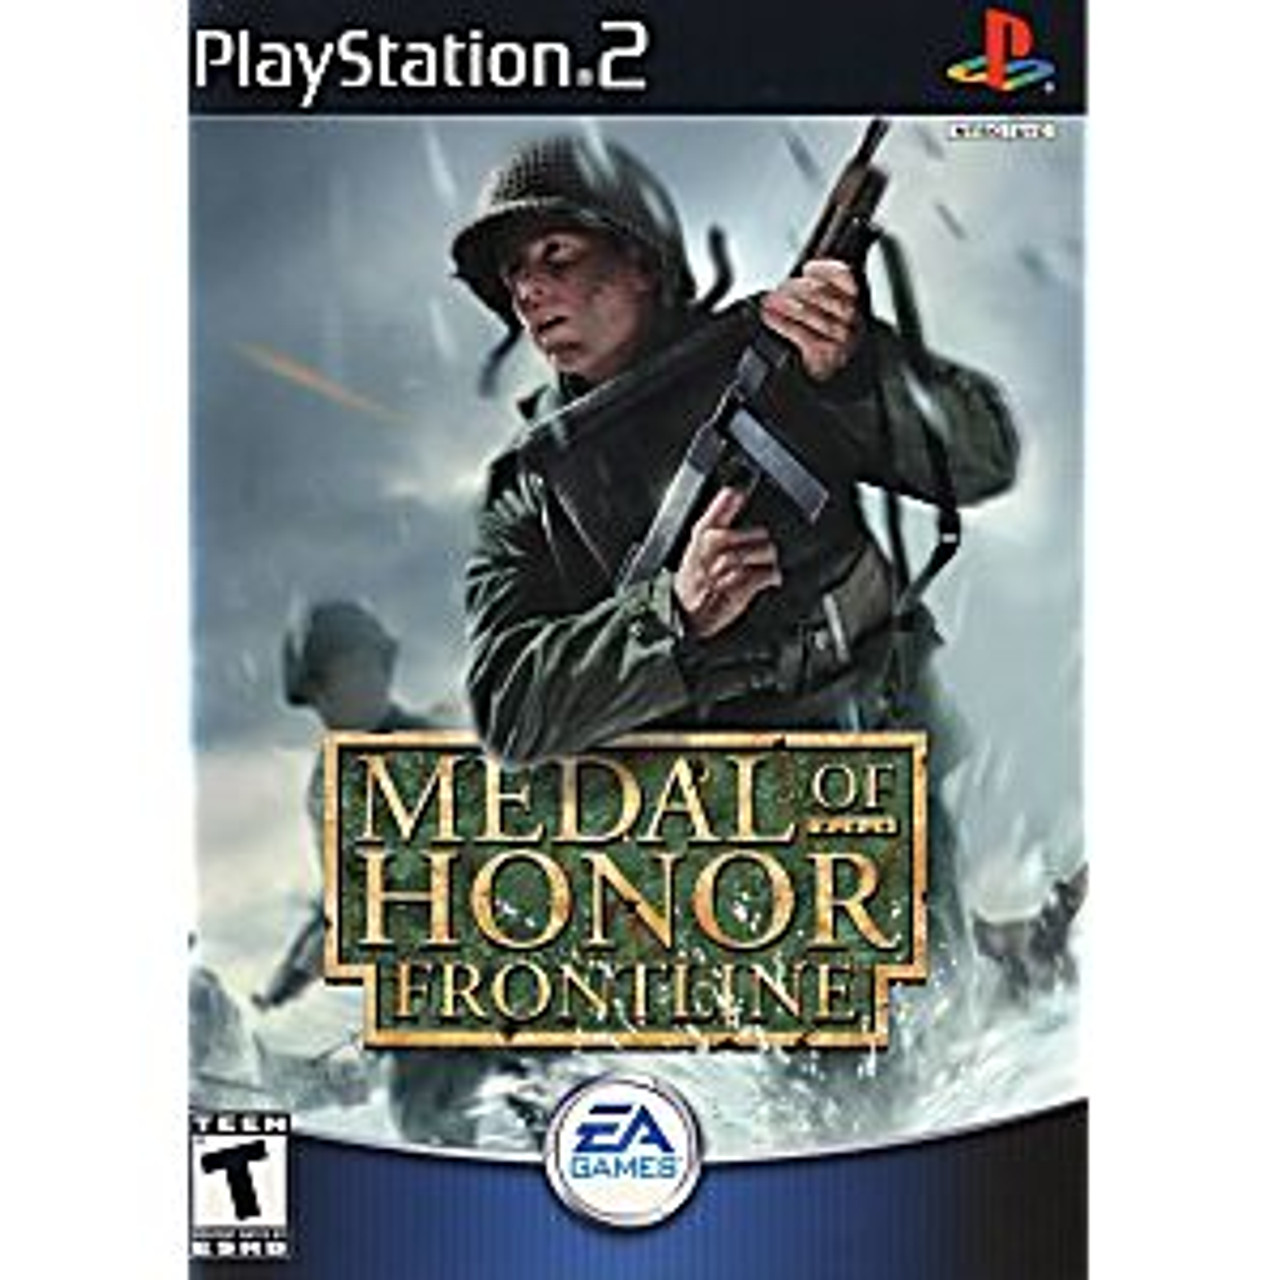 MEDAL OF HONOR FRONTLINE [T] - PS2